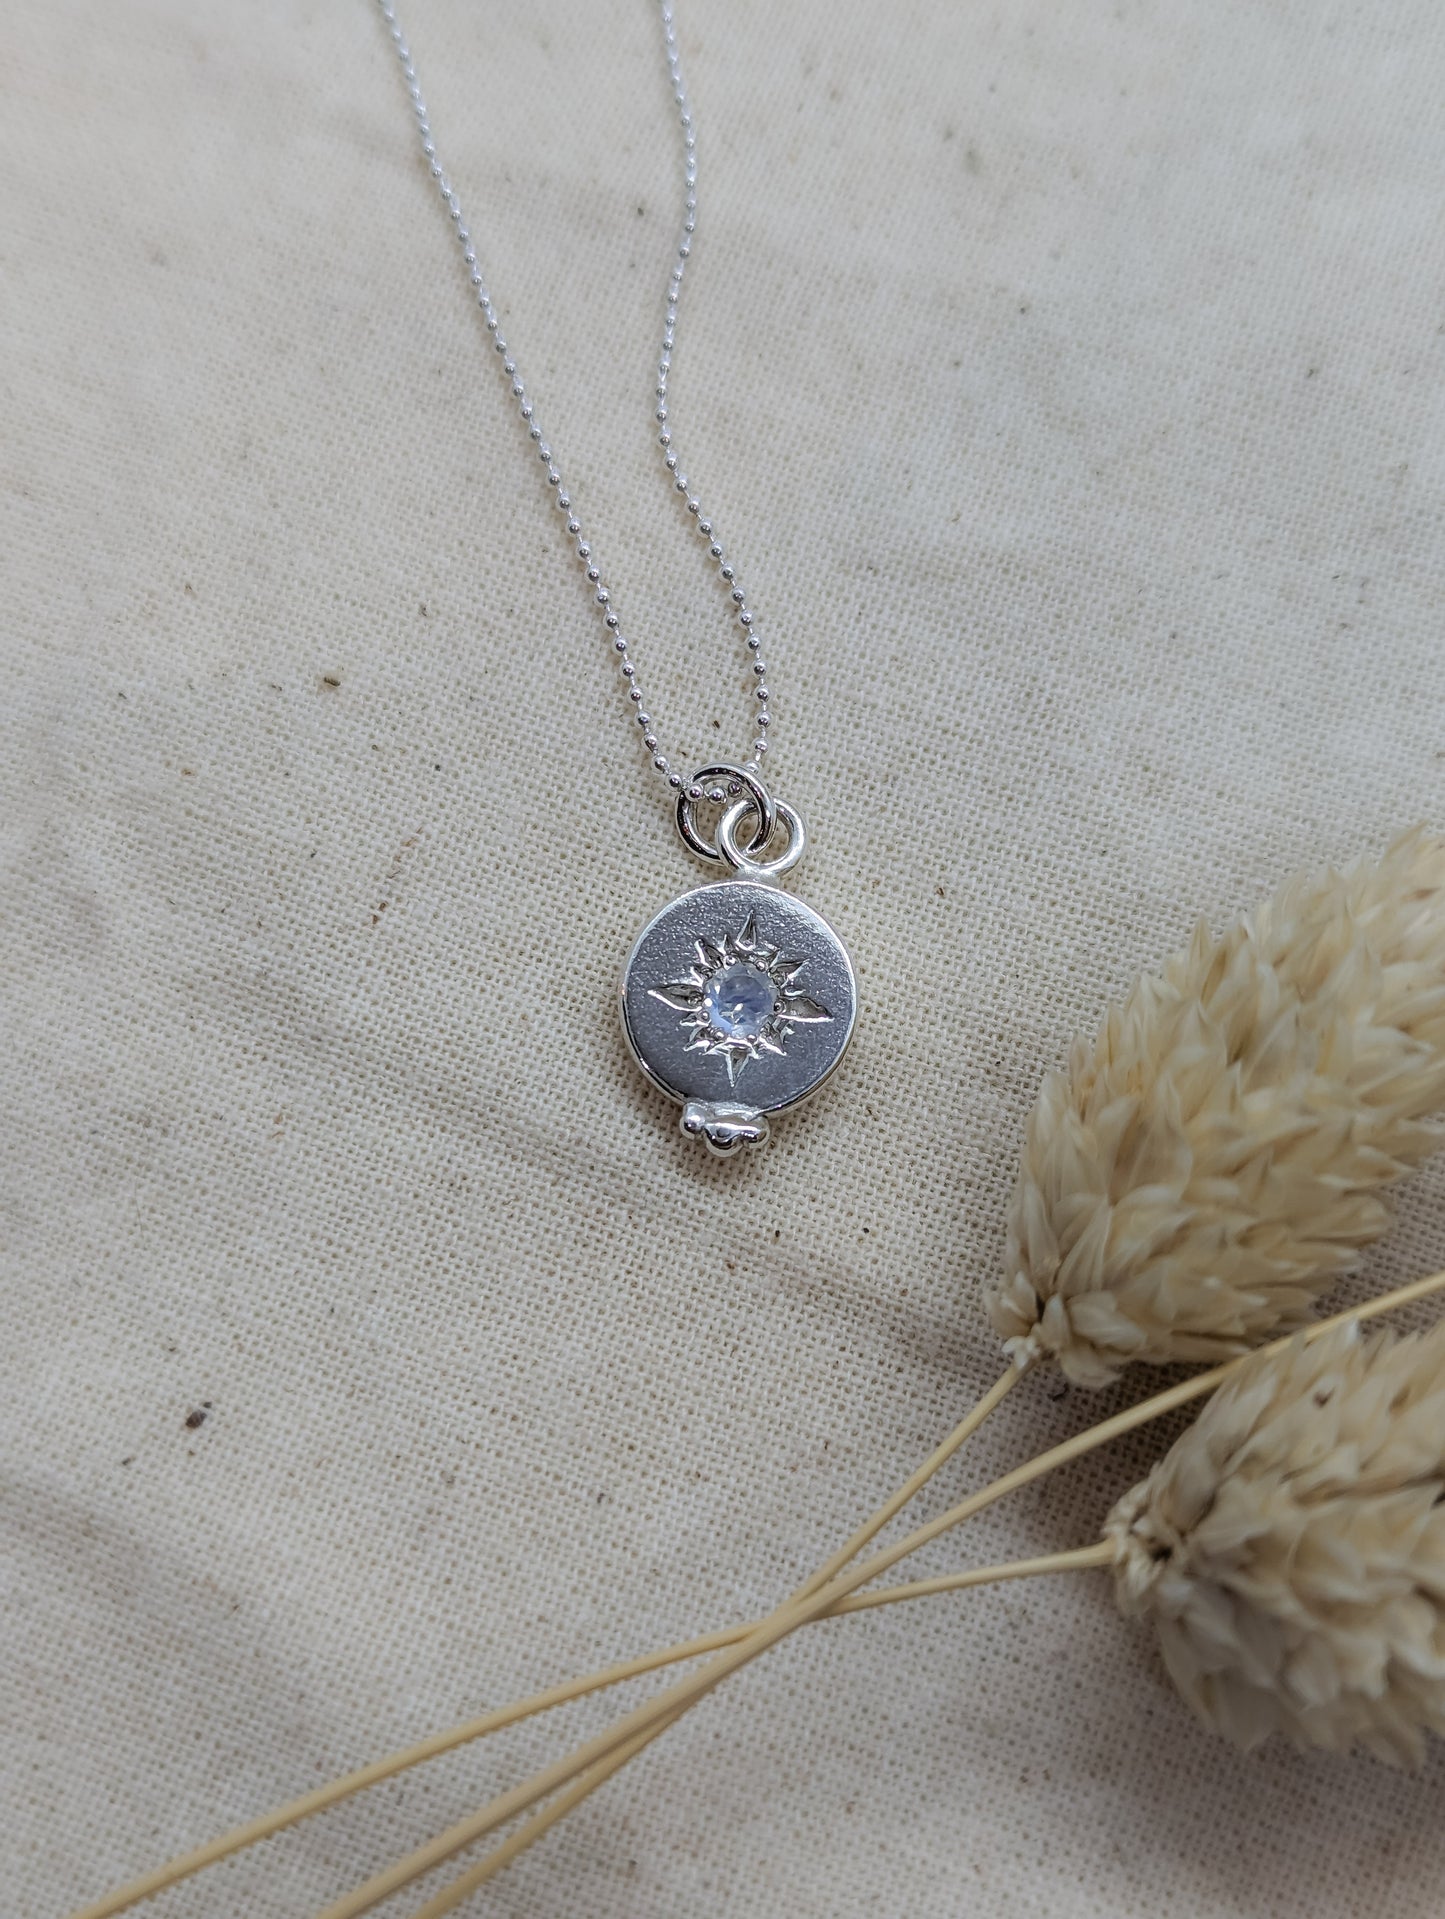 Star necklace with Rainbow Moonstone